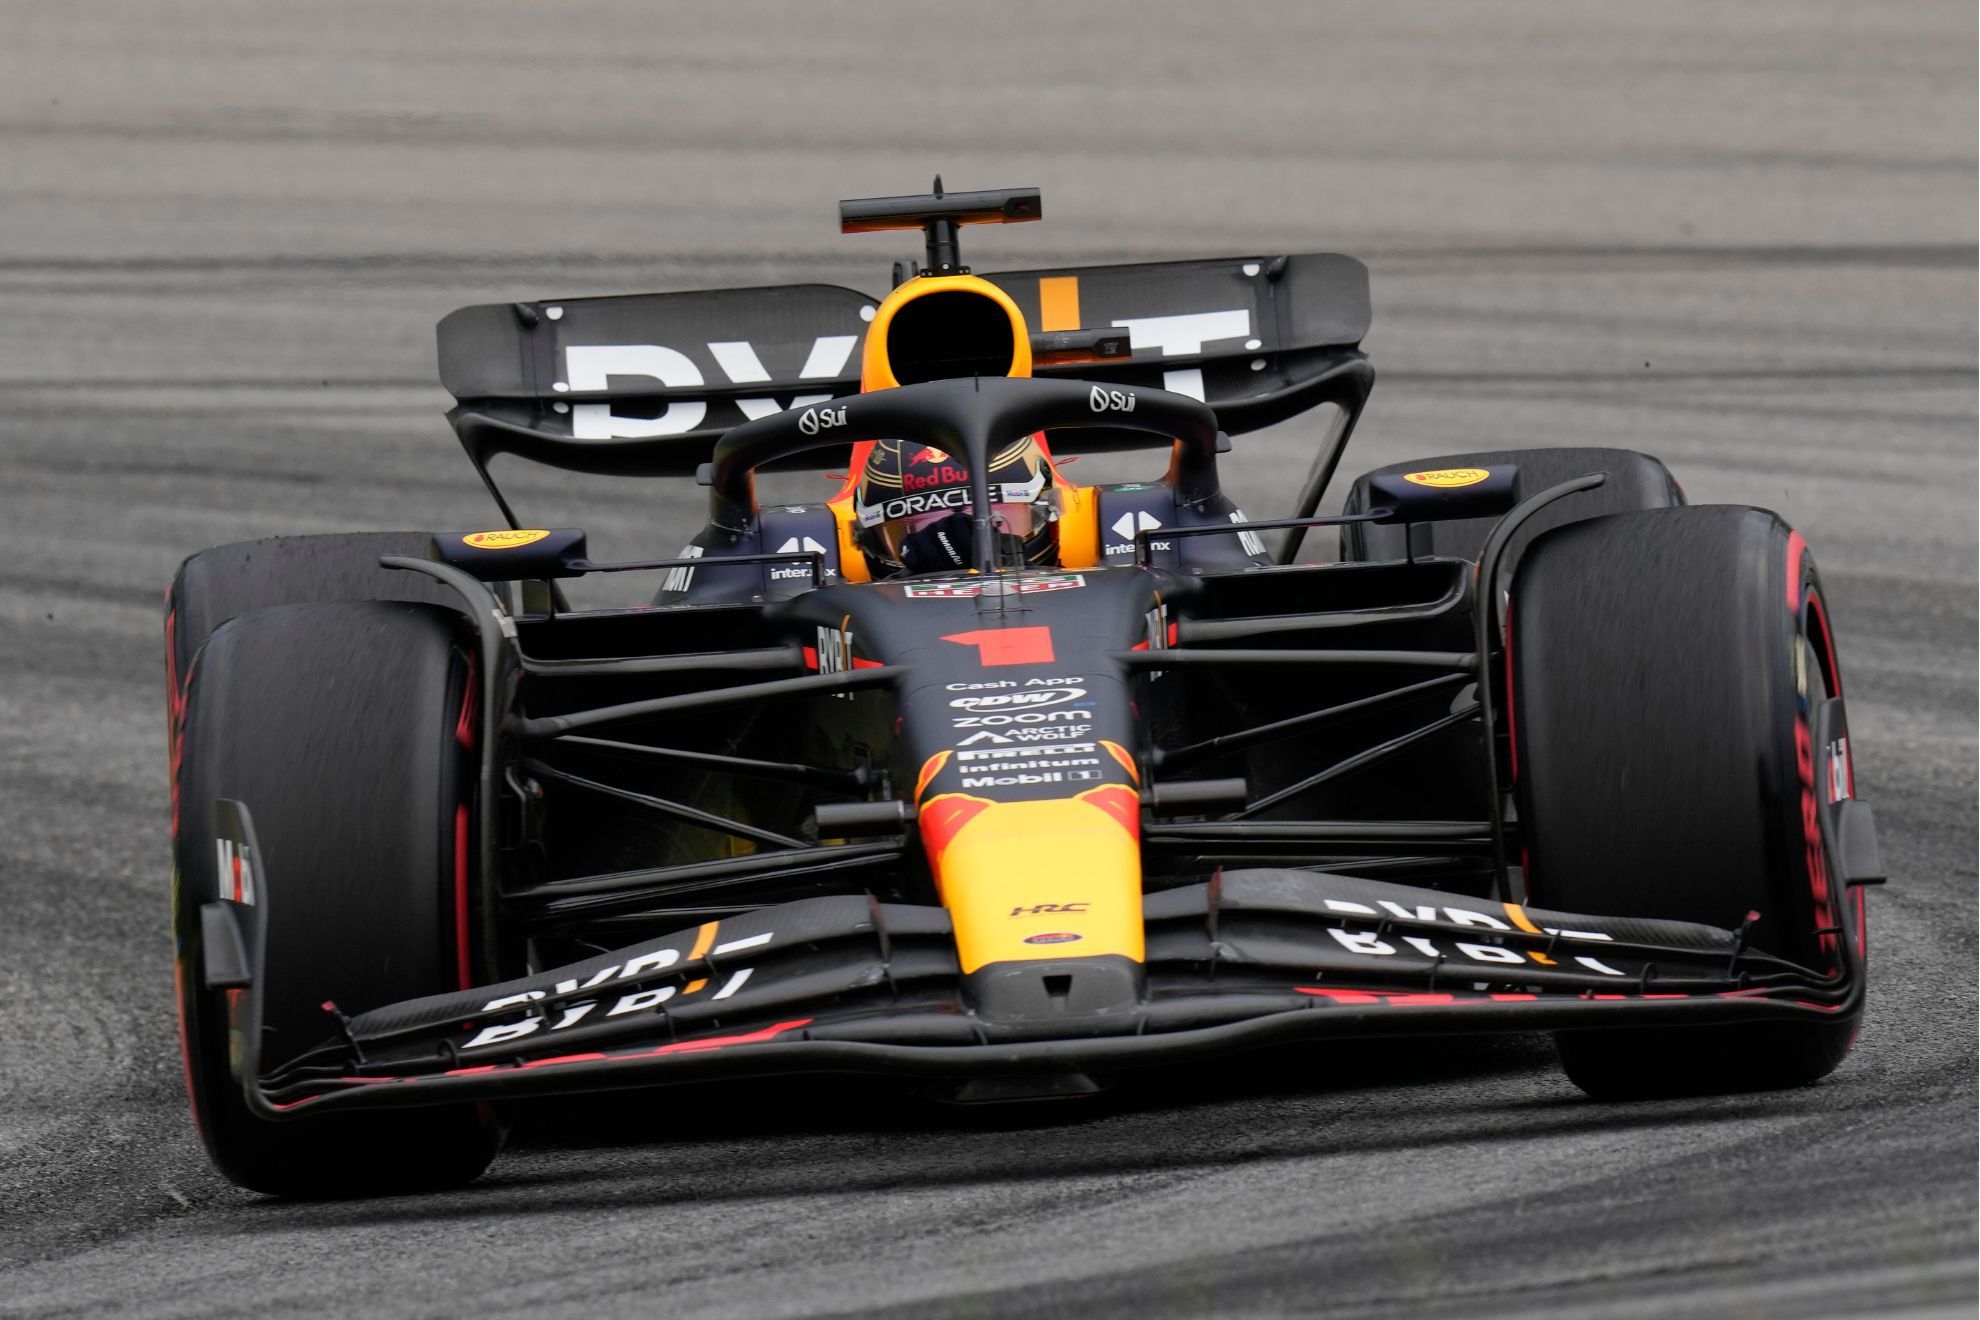 Max Verstappen steers his car during the qualifying session at the Interlagos racetrack